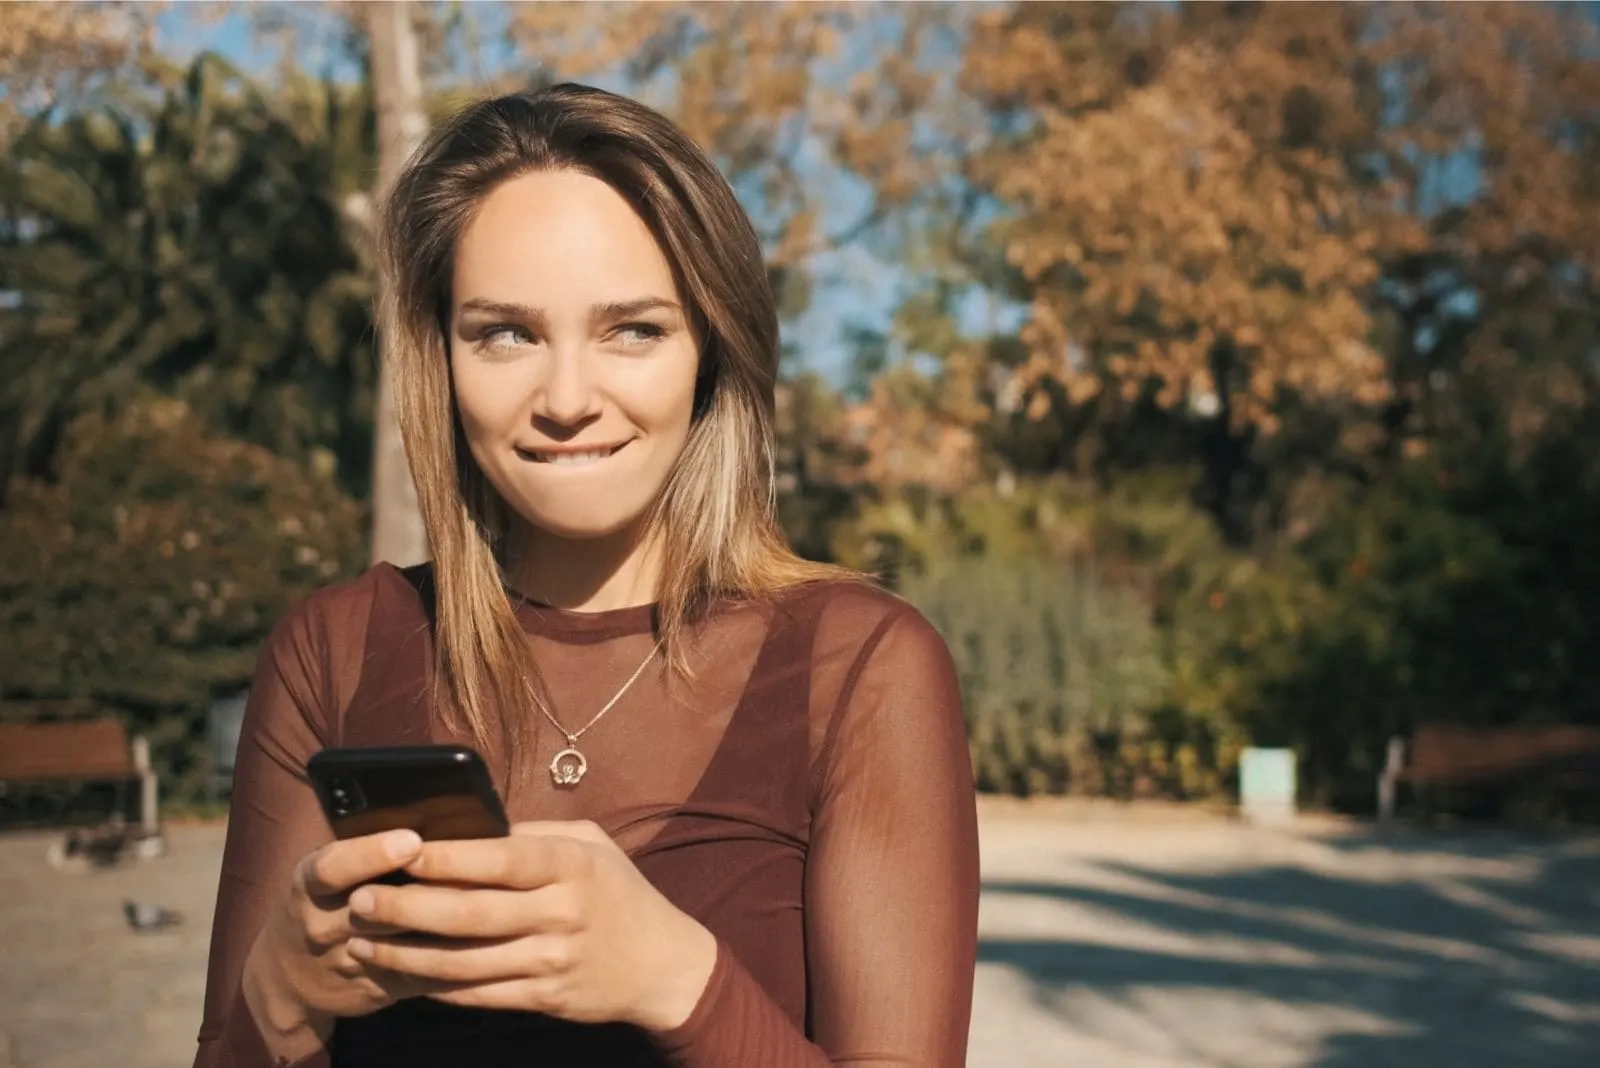 flirty woman texting biting her lip while standing outdoors and looking away